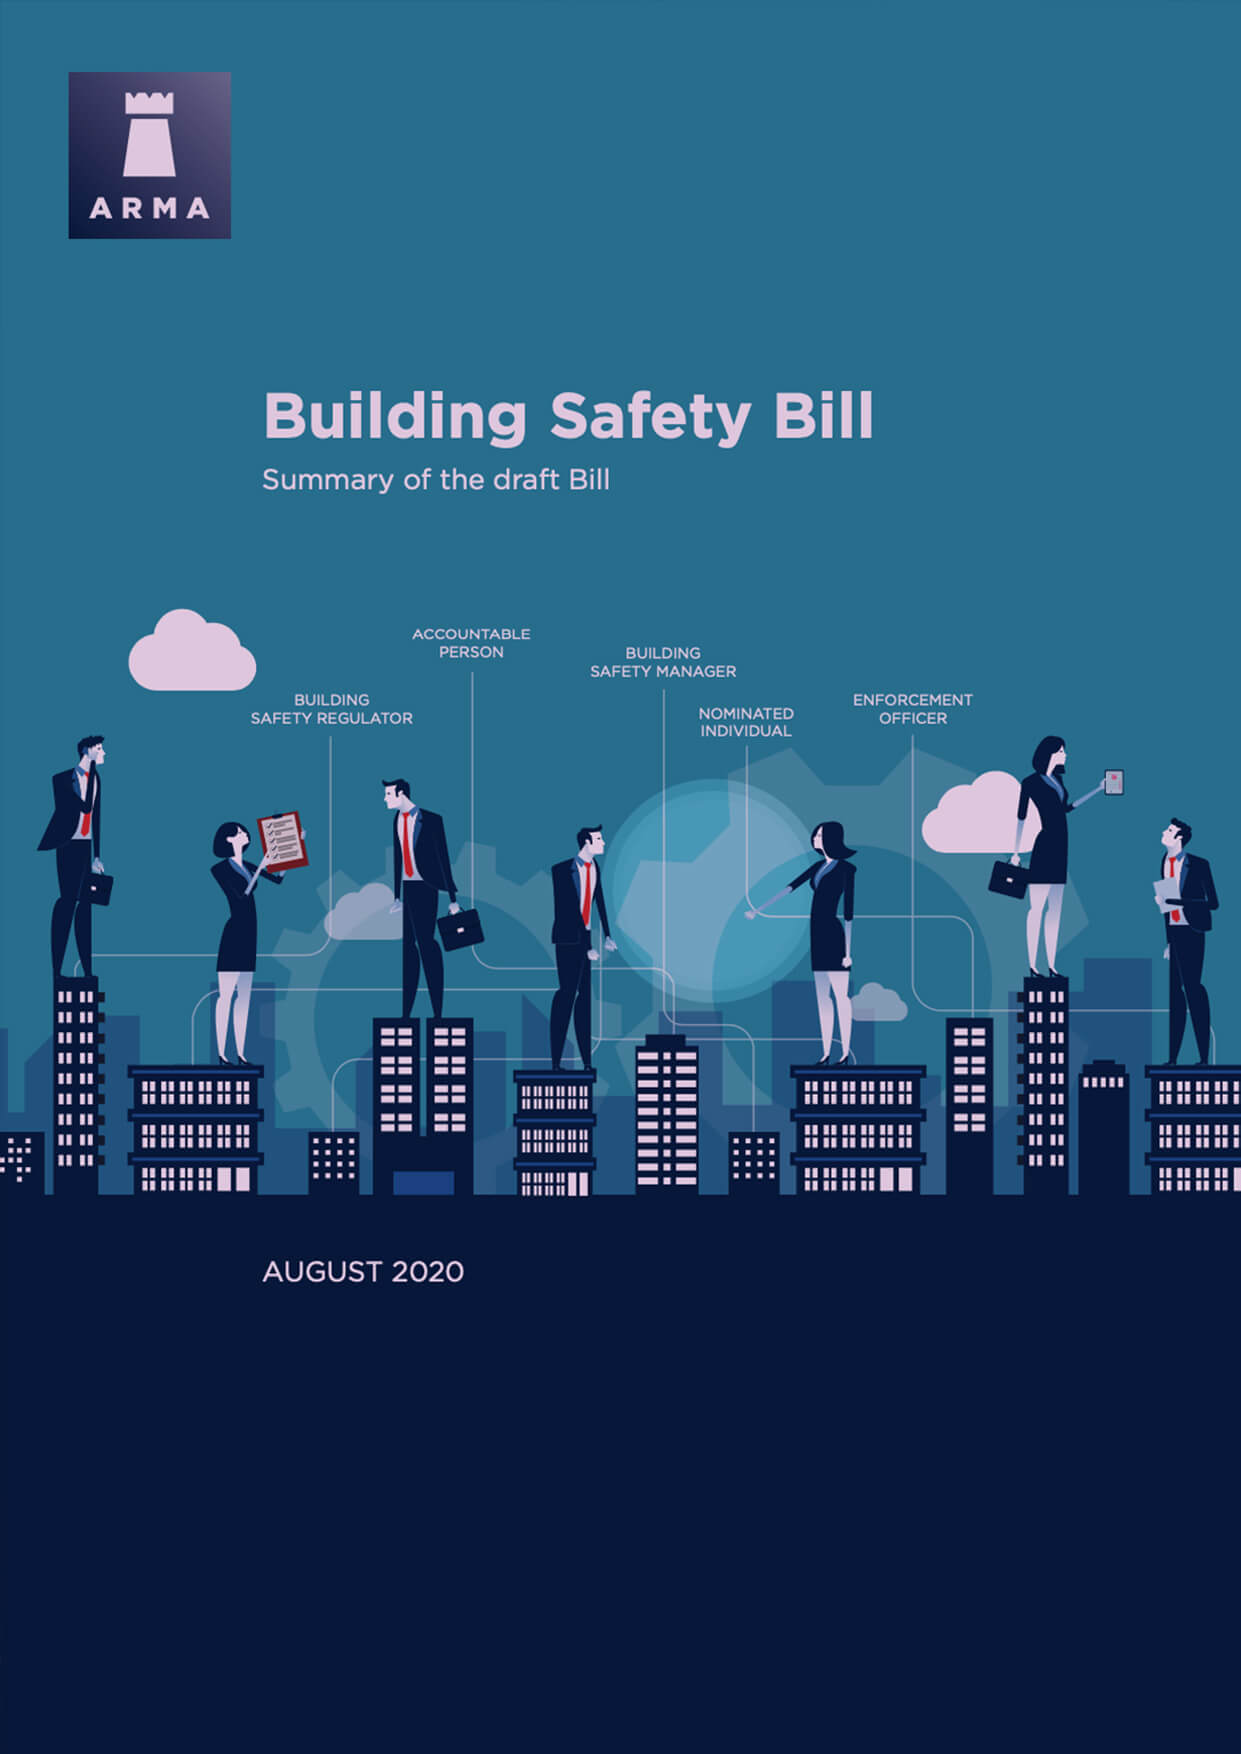 ARMA Summary of the Building Safety Bill2